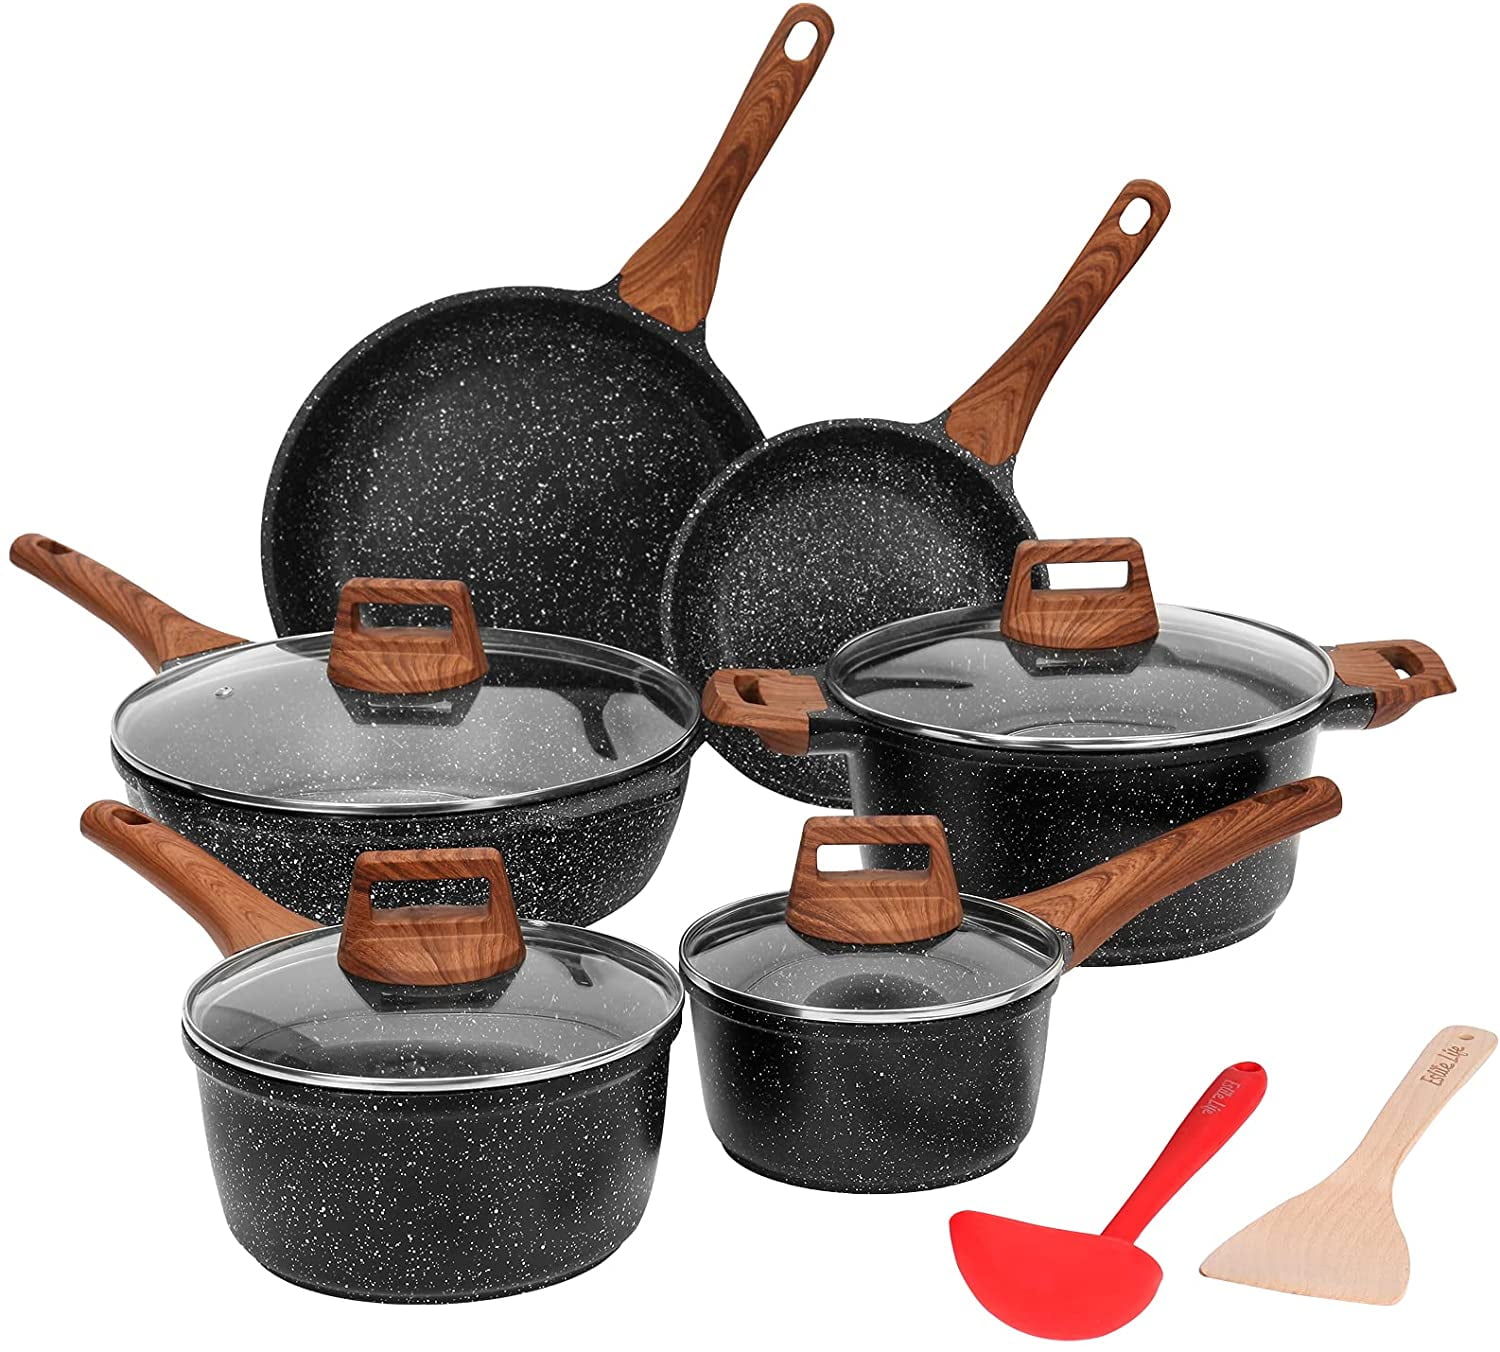  ESLITE LIFE Nonstick Cookware Sets, 8 Pcs Granite Coating Pots  and Pans Set Kitchen Cooking Set, Compatible with All Stovetops (Gas,  Electric & Induction), PFOA Free: Home & Kitchen